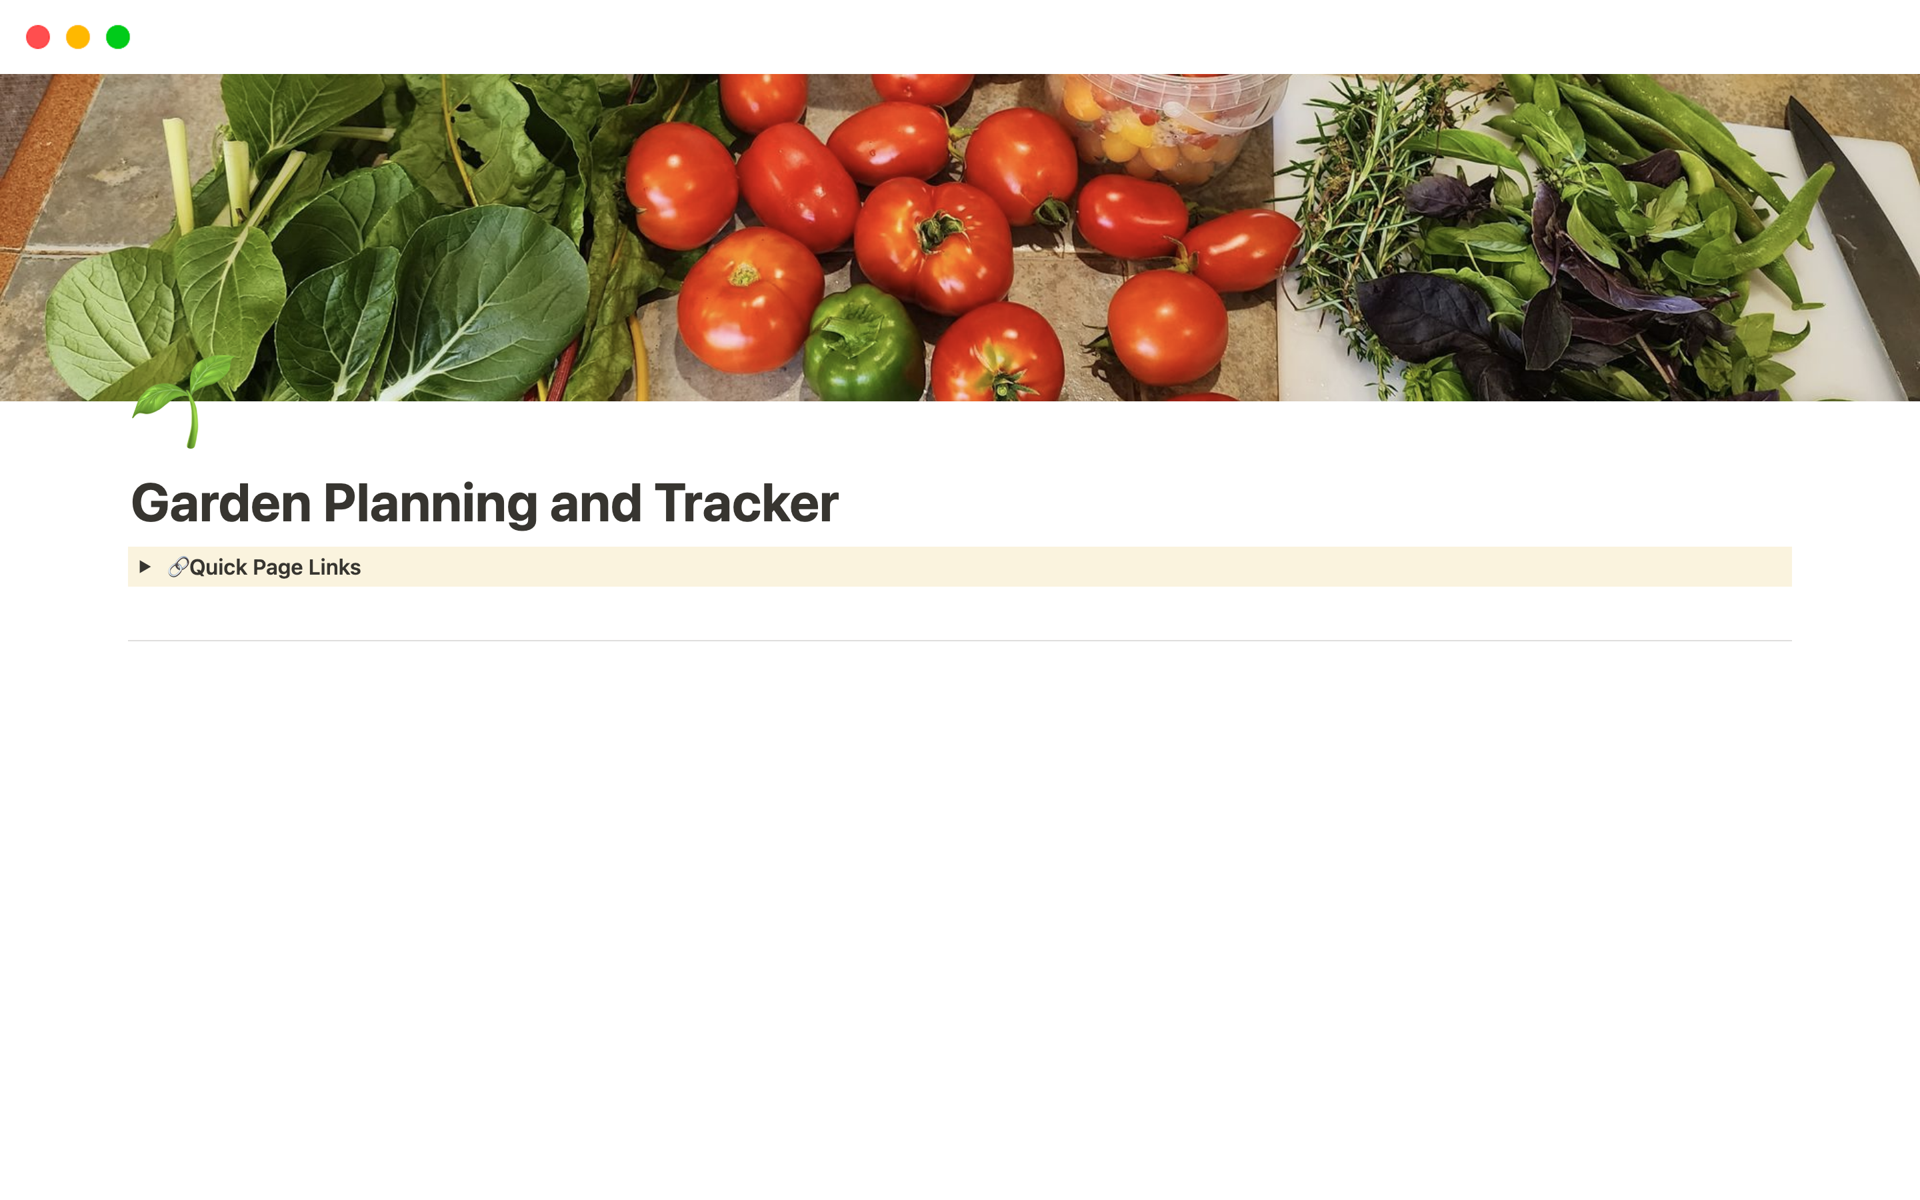 A customizable garden planner and tracker to help maintain your garden space